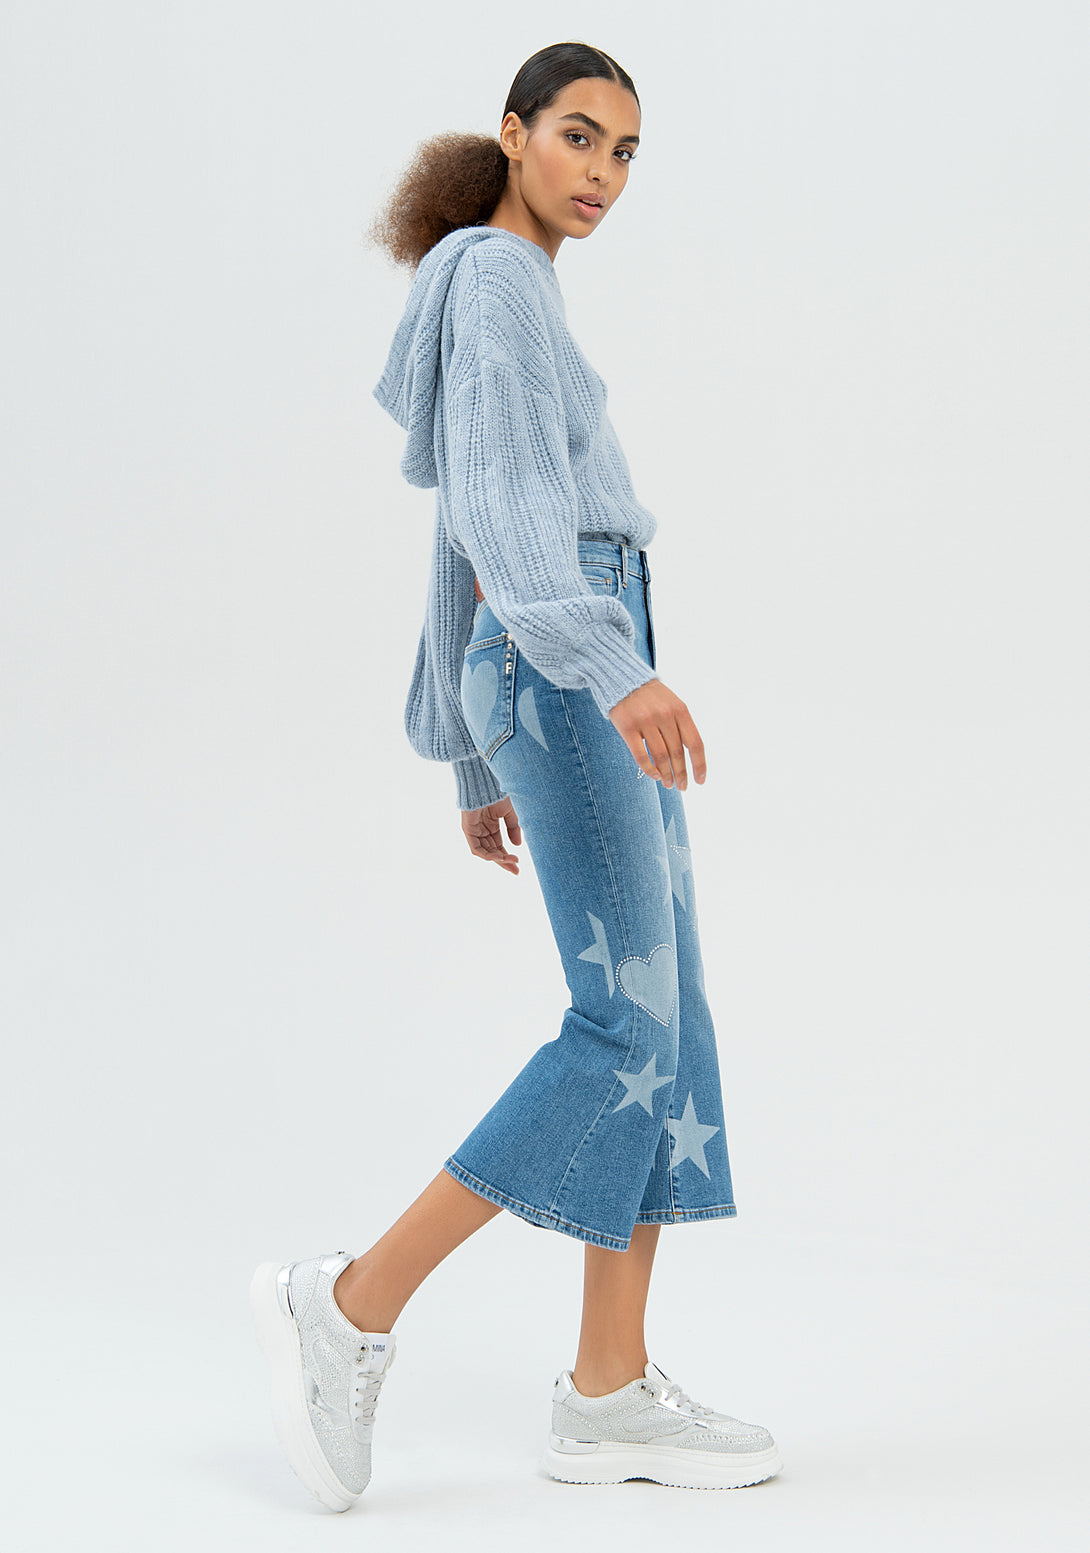 Jeans flare cropped made in denim with symbols pattern Fracomina FP22WV9006D41893-349-4